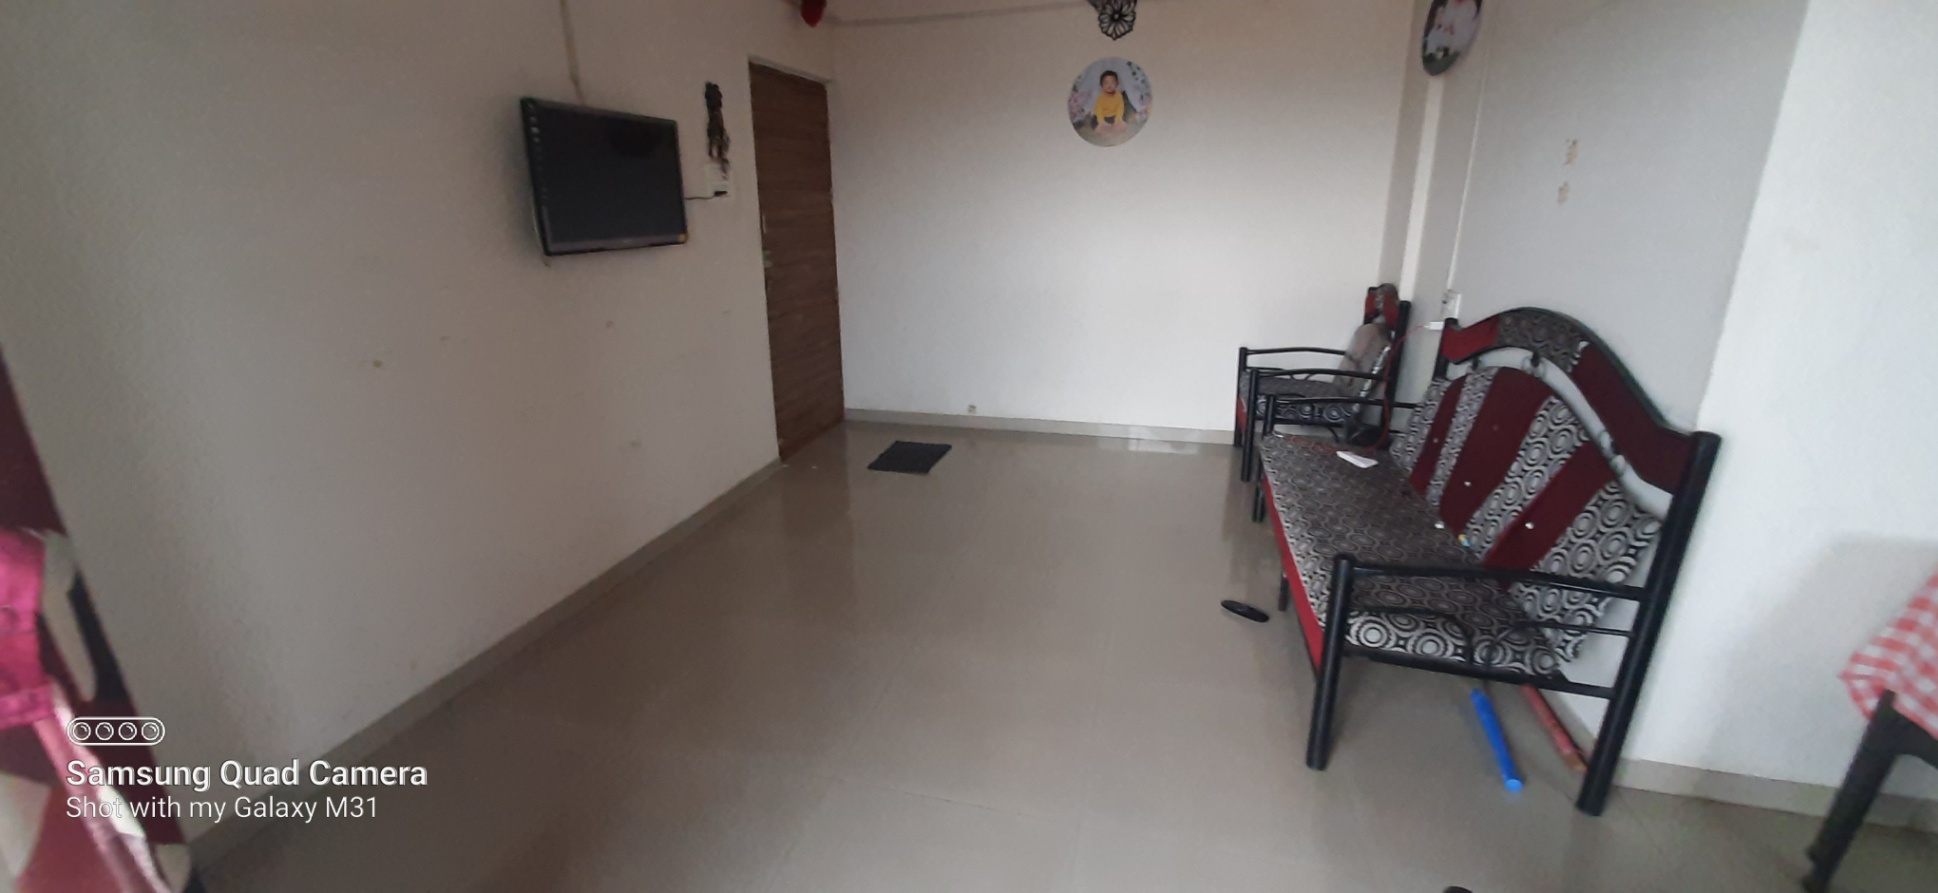 2 Bed/ 2 Bath Rent Apartment/ Flat; 830 sq. ft. carpet area, UnFurnished for rent @B705 Rutusparsh co operative housing society Moshi Pune 